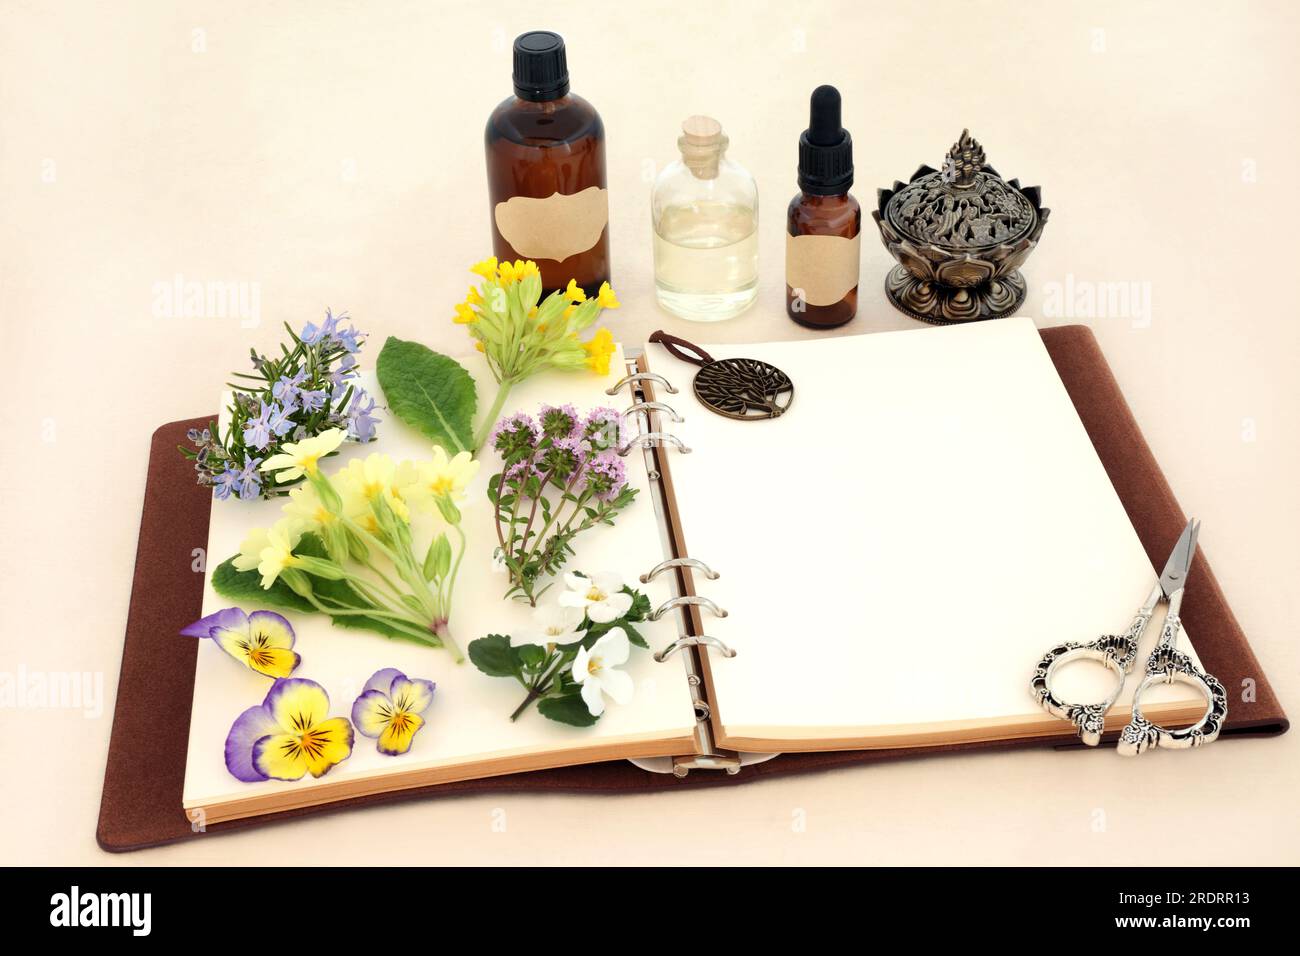 Naturopathic herbal medicine preparation with flowers, herbs and essential oil bottles with notebook. Natural floral nature healthcare concept . Stock Photo